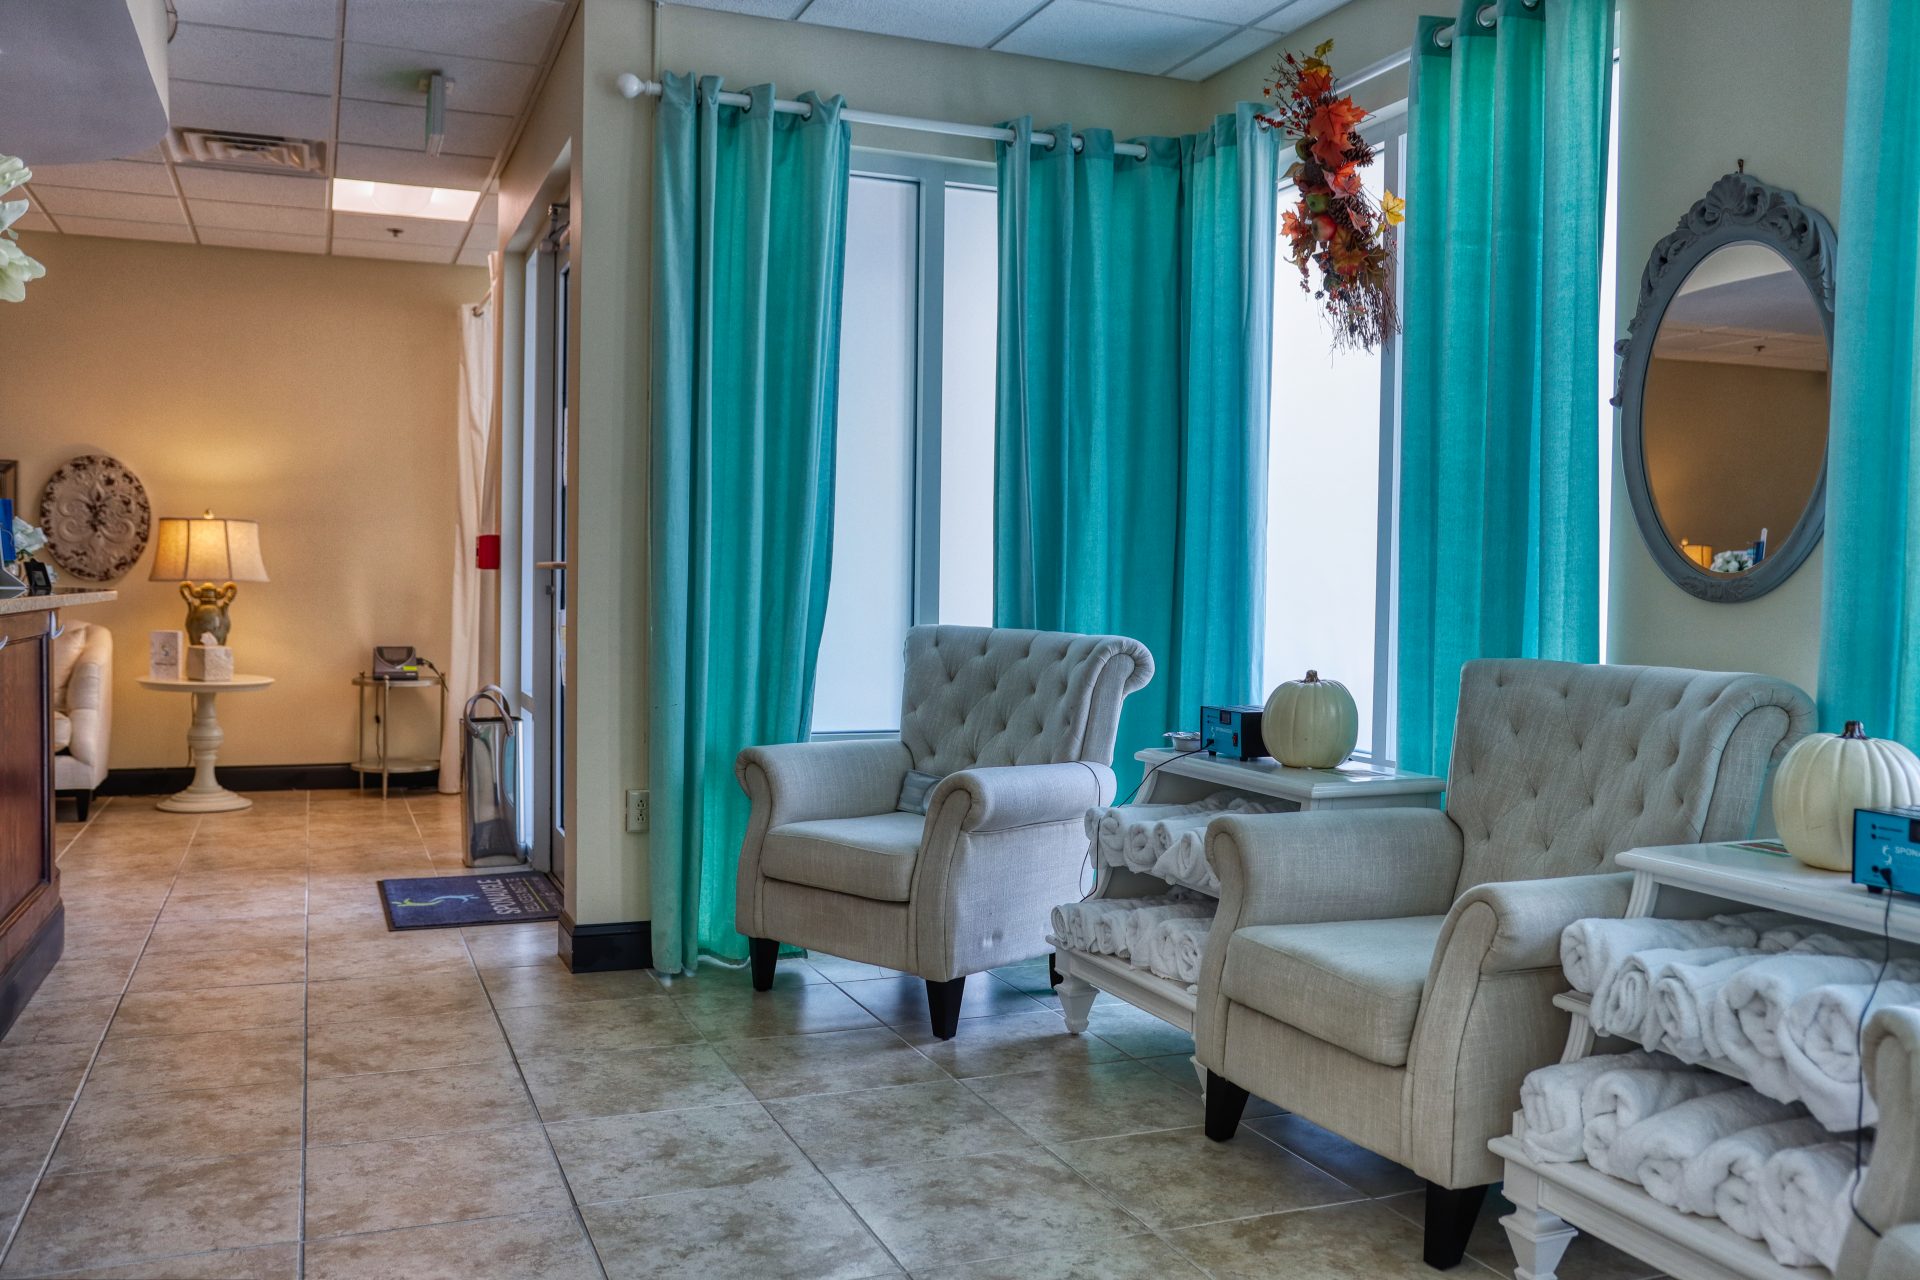 Bemer therapy in tampa